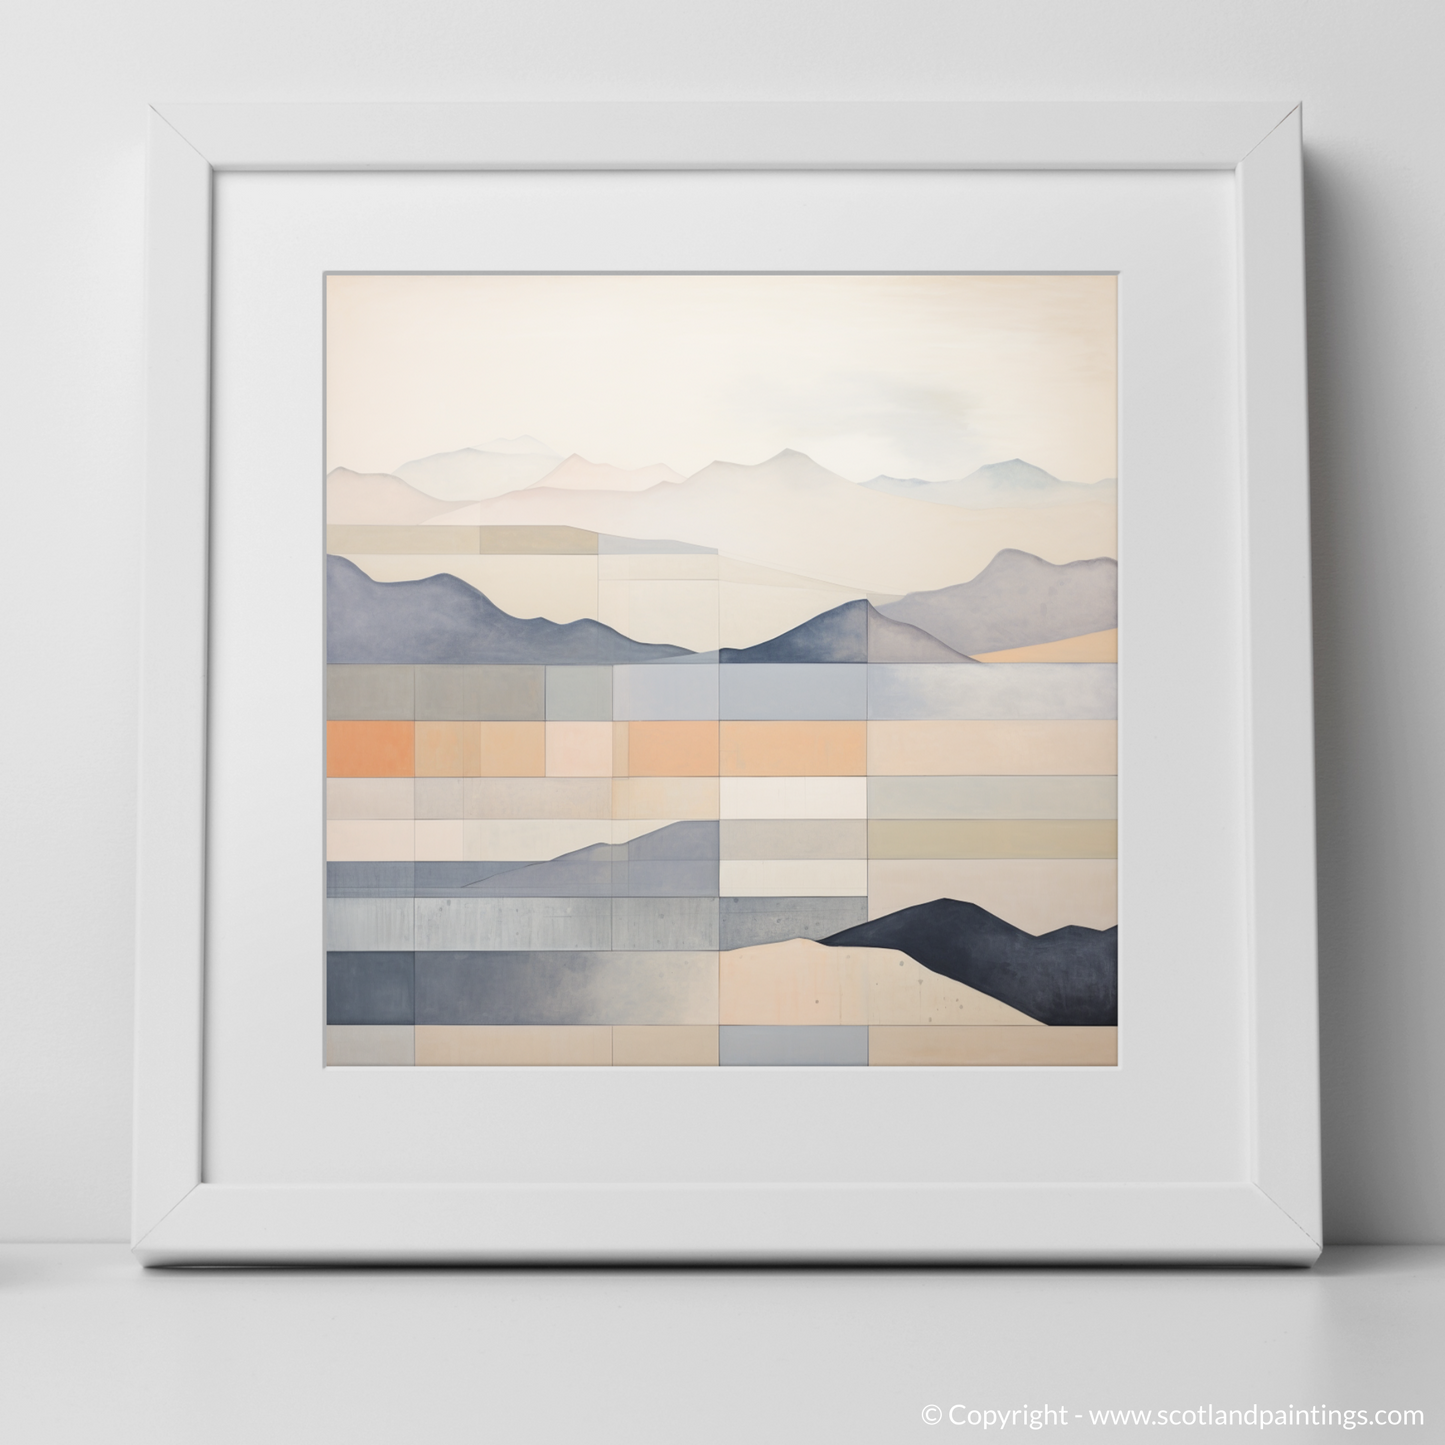 Art Print of Creag Mhòr (Meall na Aighean) with a white frame